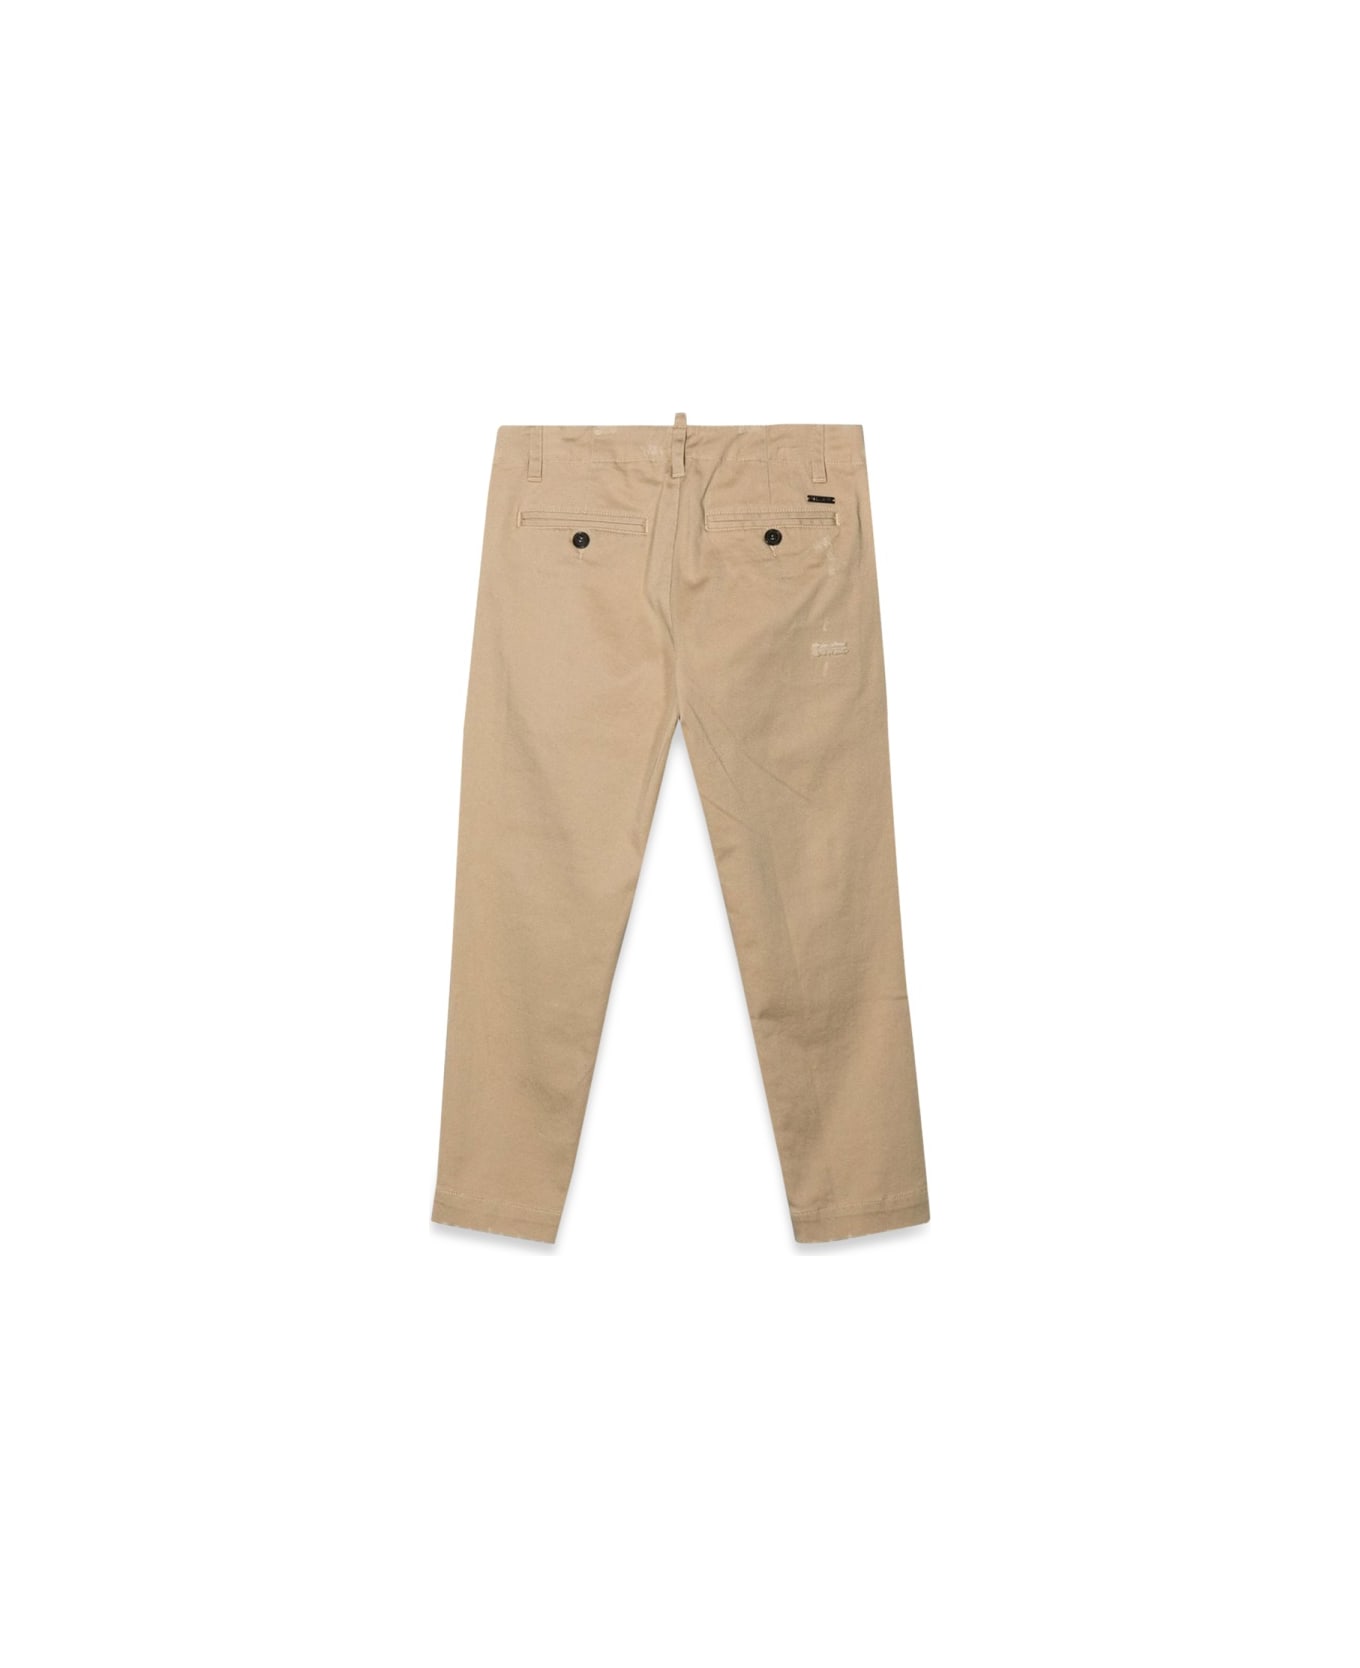 Dsquared2 Pants With Patches - BEIGE ボトムス